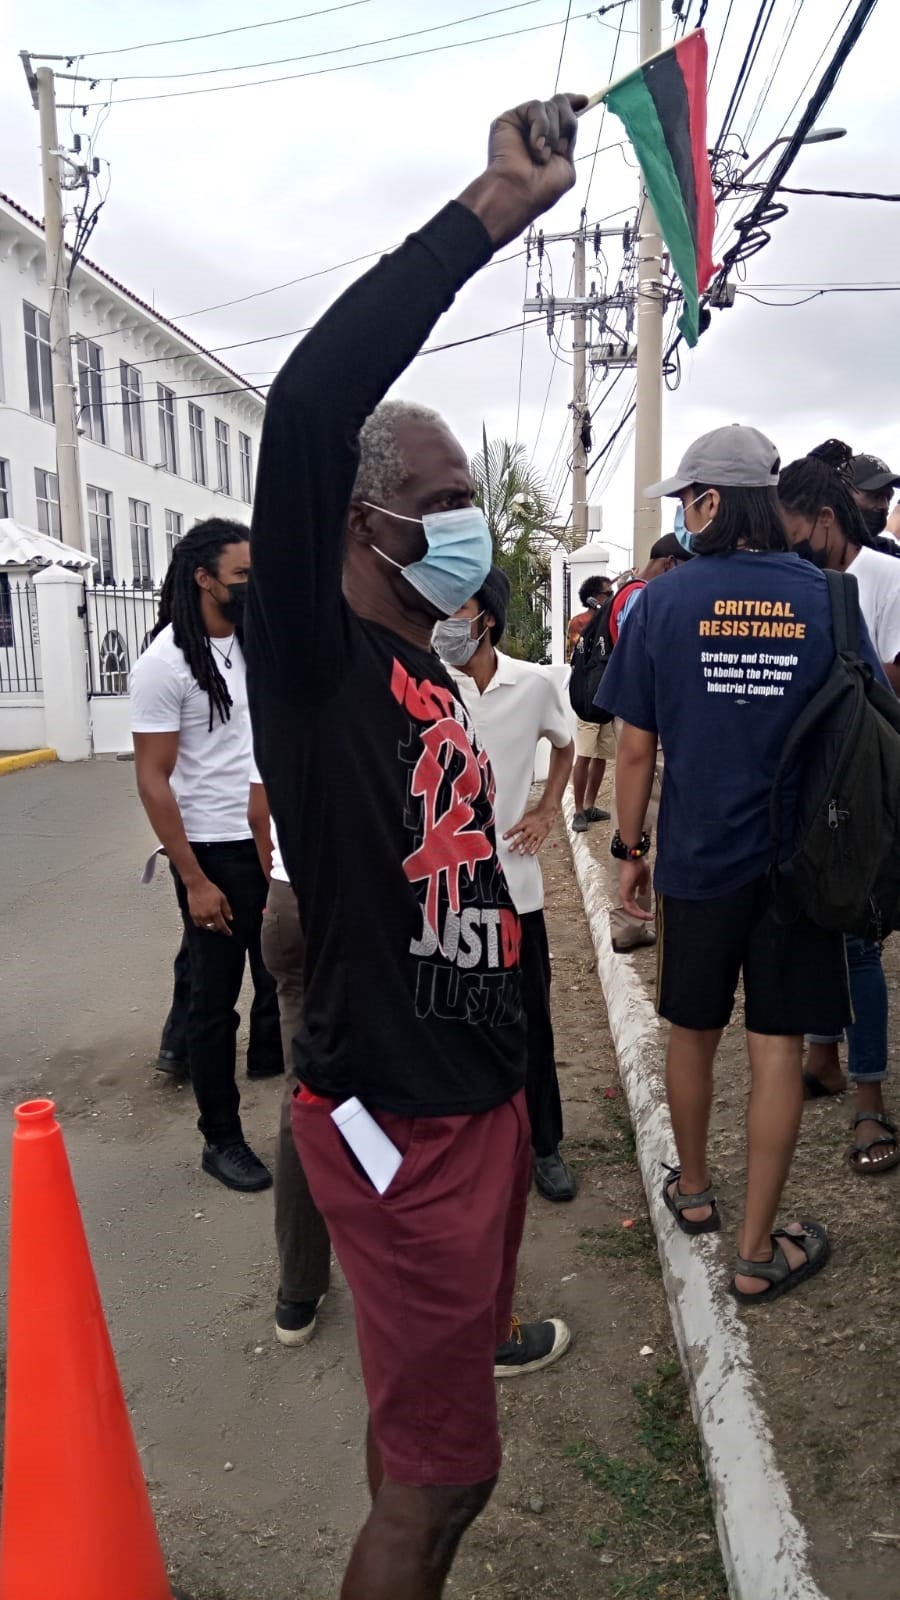 A protest outside the British High Commission in Kingston, Jamaica (Advocates Network handout)